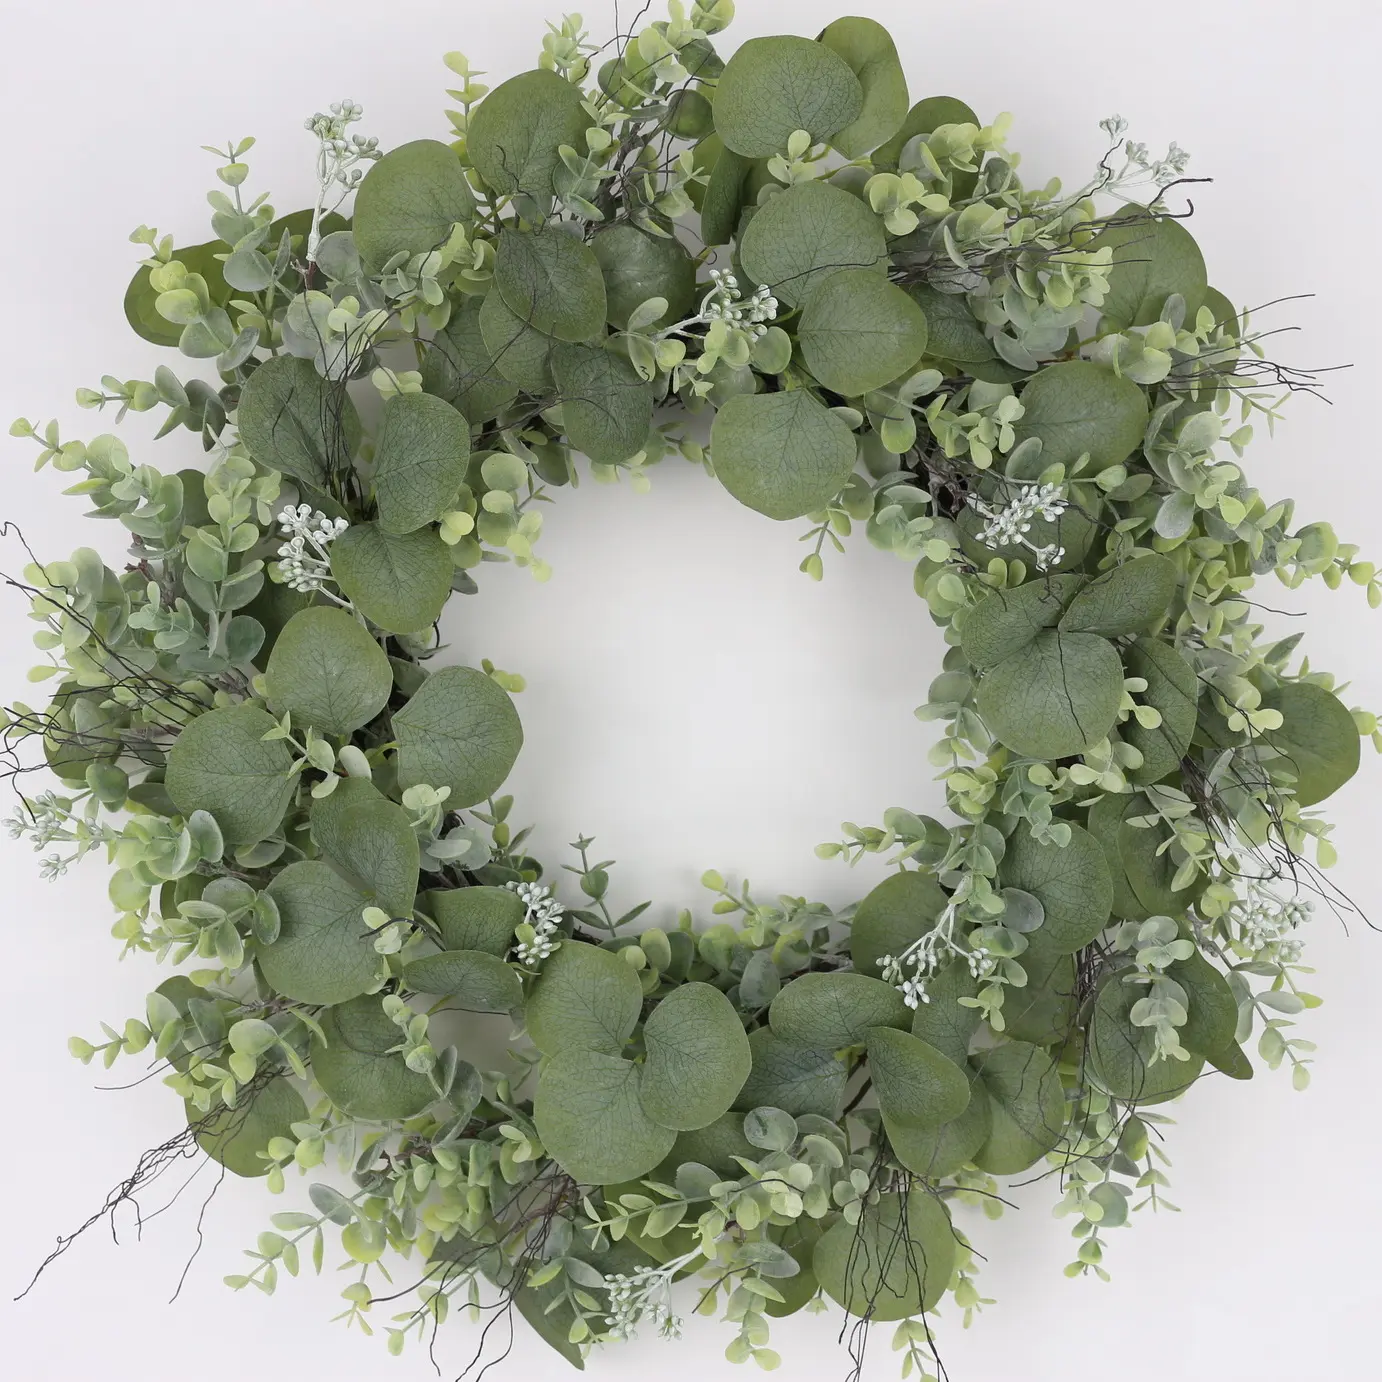 GY BSCI 14 inch Handmade Leaves Green Artificial Eucalyptus Wreath For Front Door Spring Wreath